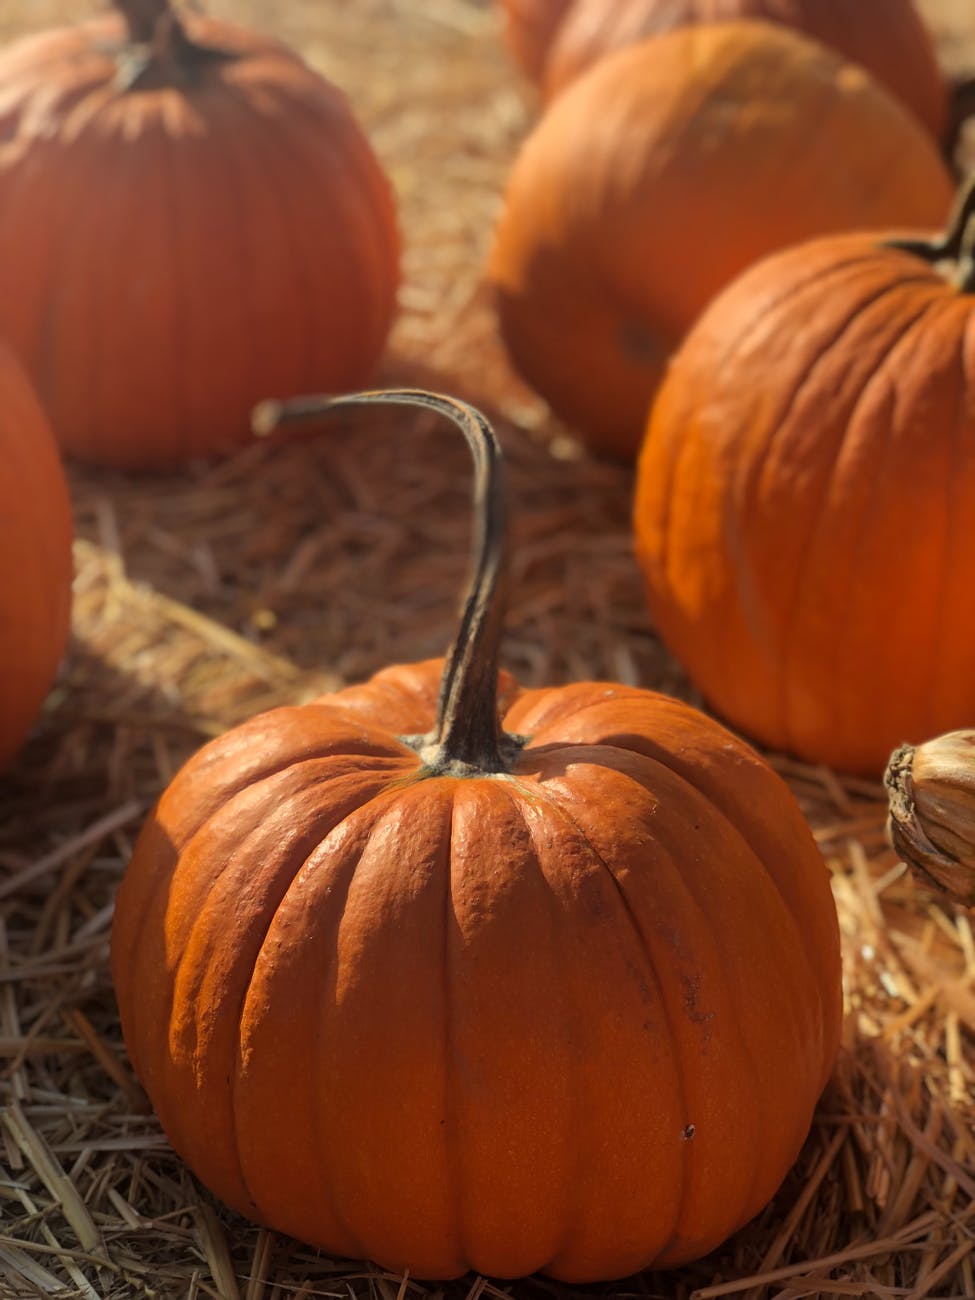 orange pumpkins on hay field could be cut up and given to horses